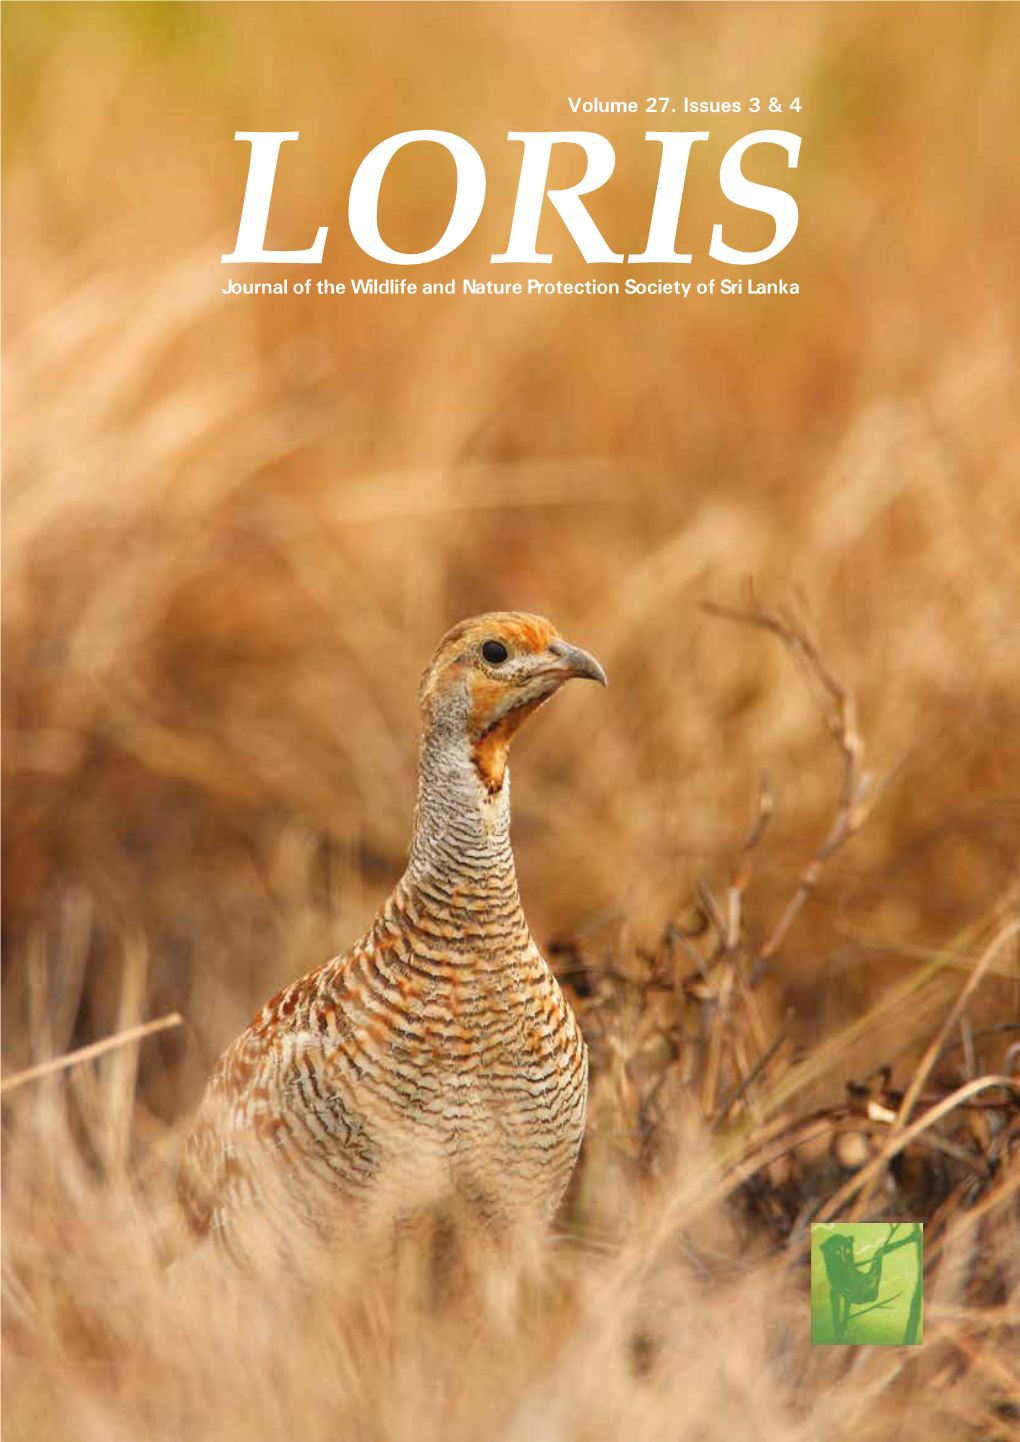 Journal of the Wildlife and Nature Protection Society of Sri Lanka